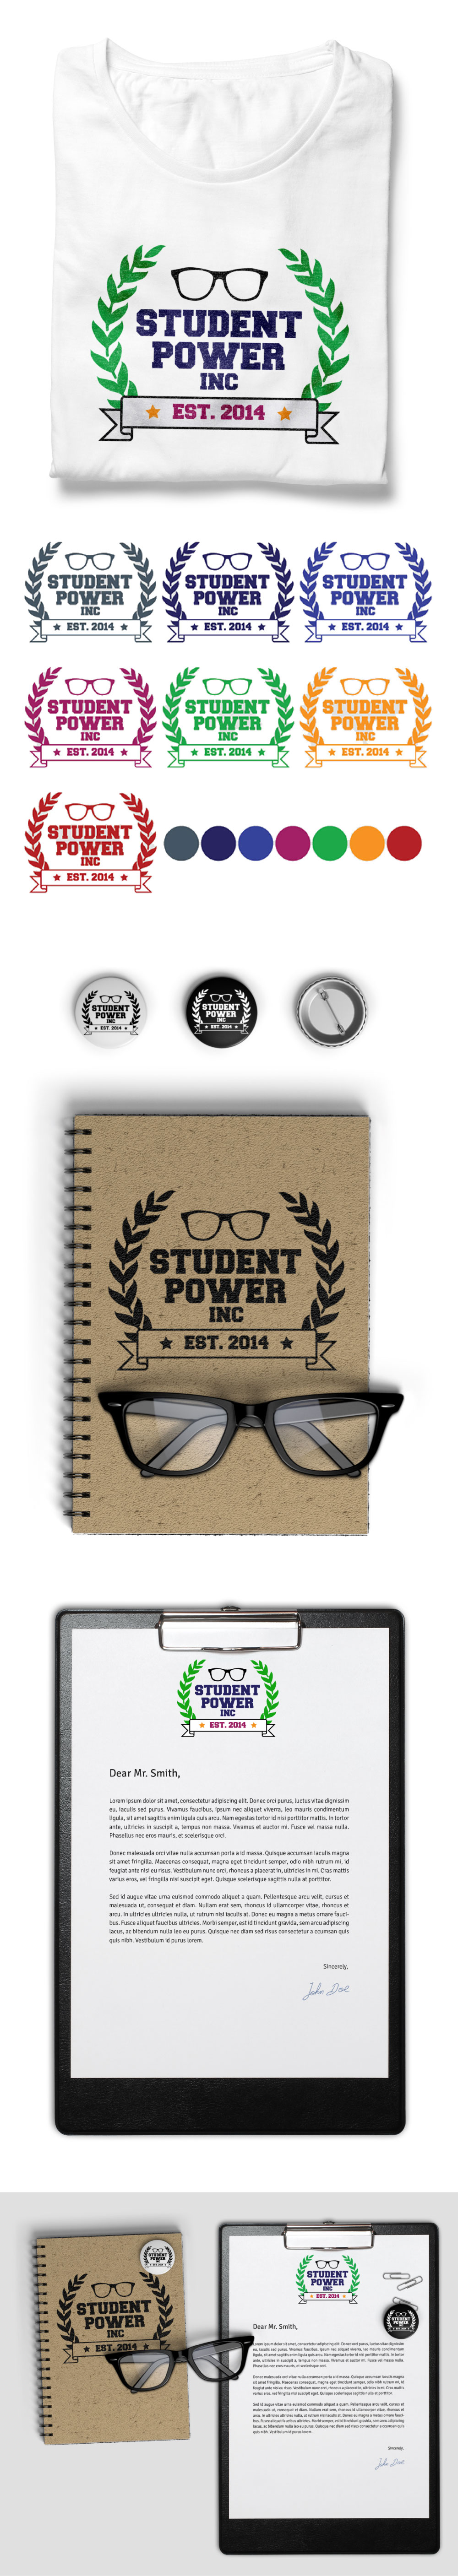 Student-Power-project-by-Tracey-Renee-Hubbard